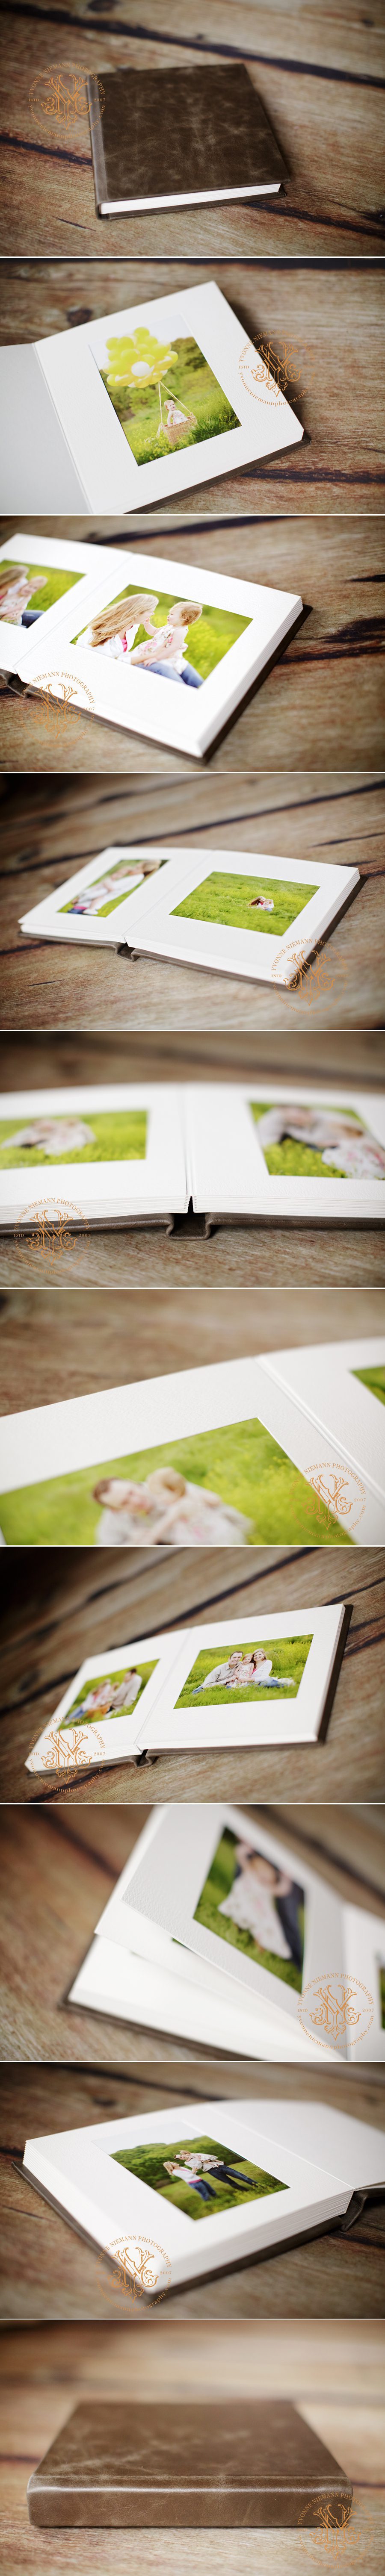 Family Portraits in a Matted Album offered by Yvonne Niemann Photography